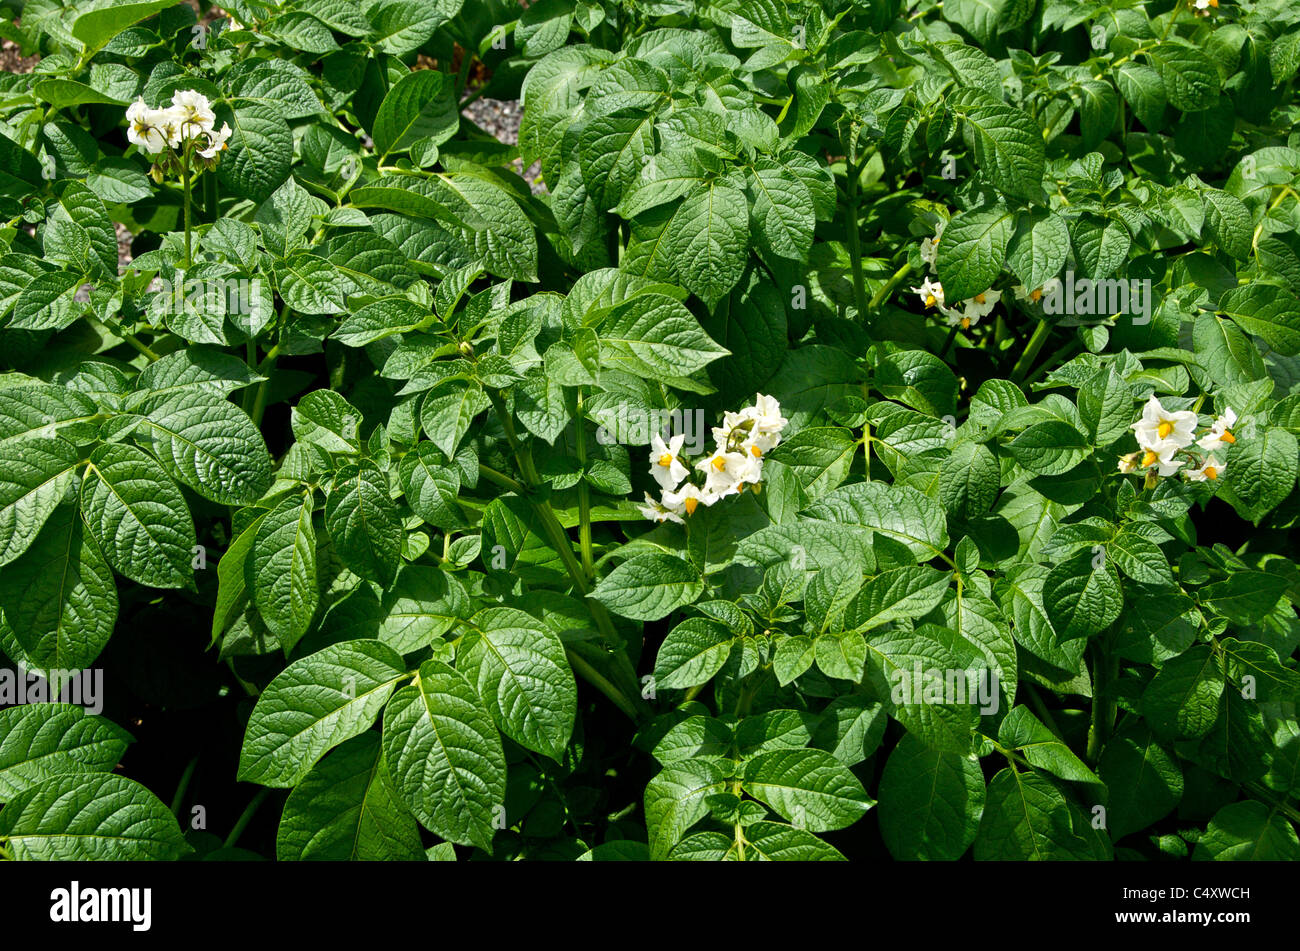 Potatoes growing in a cottage garden Stock Photo